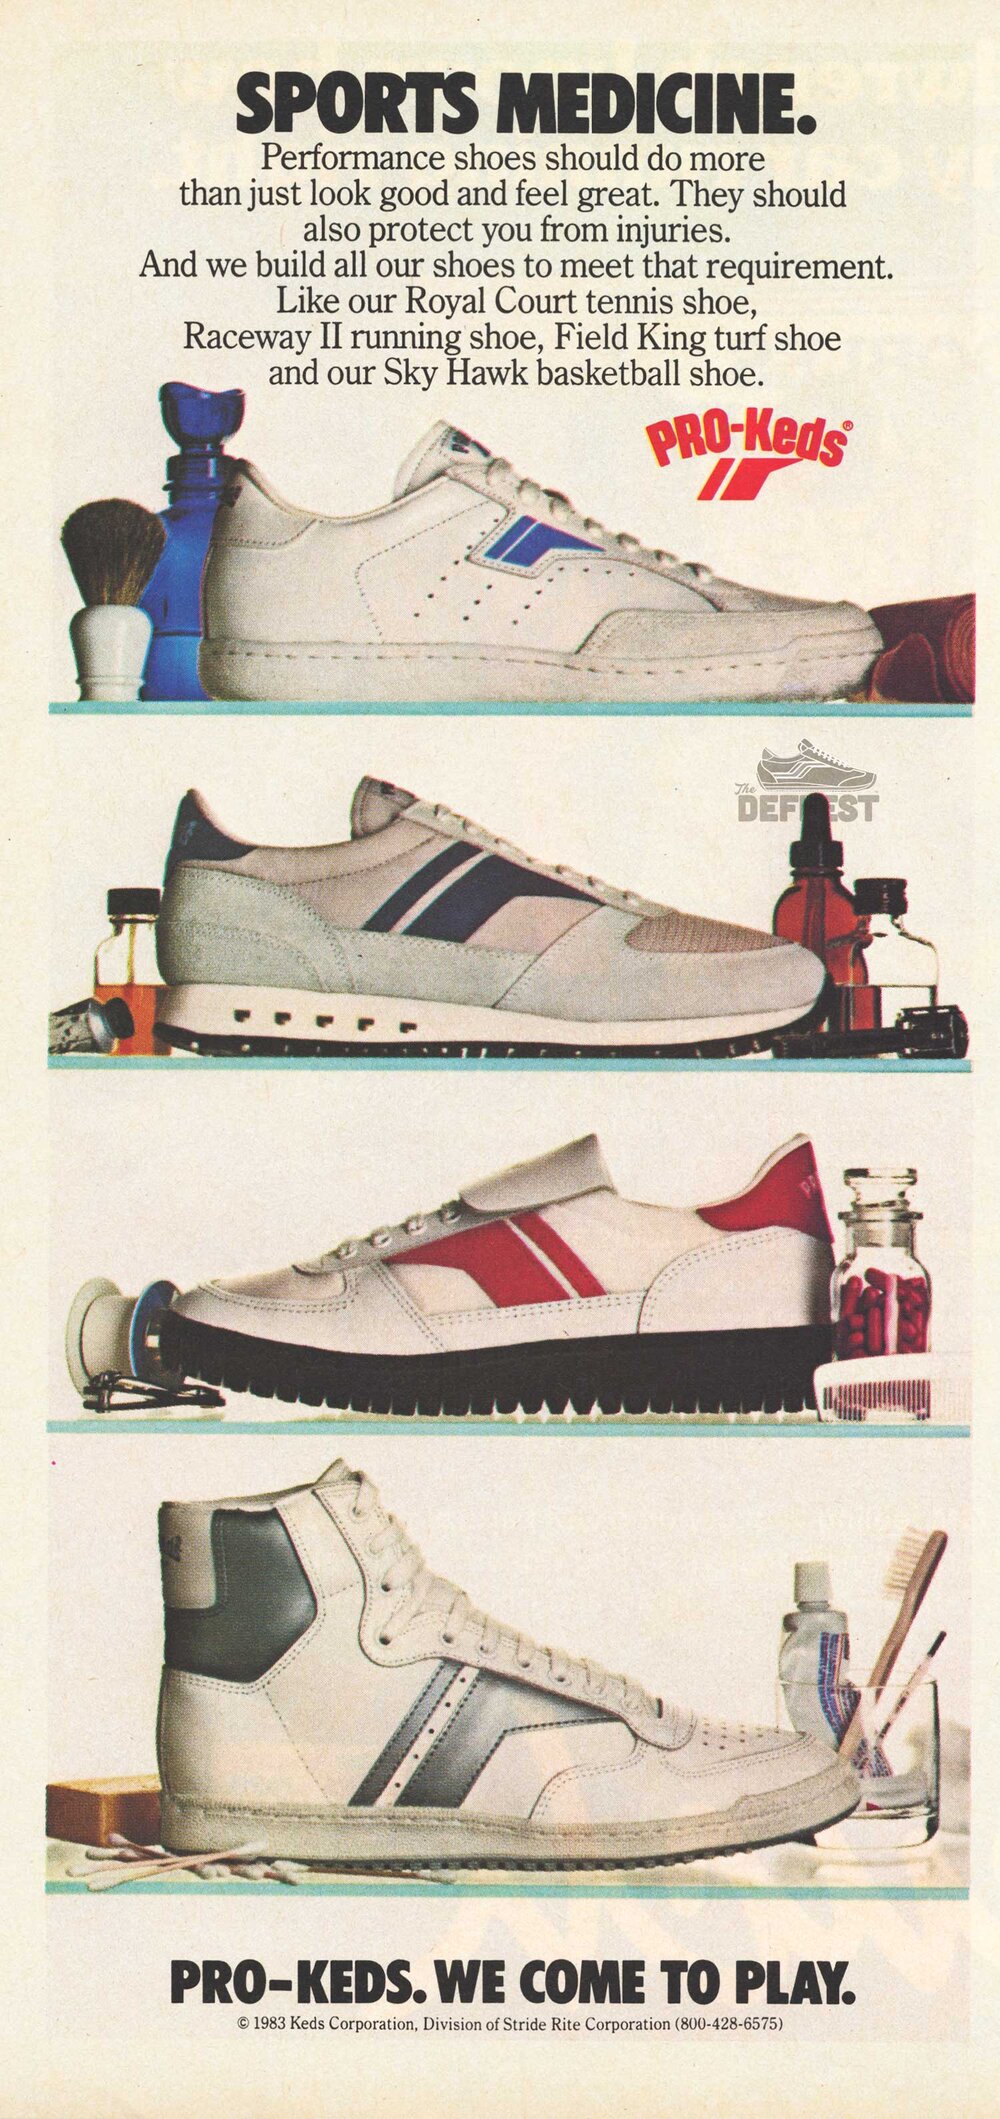 The Deffest®. vintage and retro sneaker blog. — Pro-Keds vintage sneakers ad the Royal Court, Raceway II, Field King and Sky Hawk